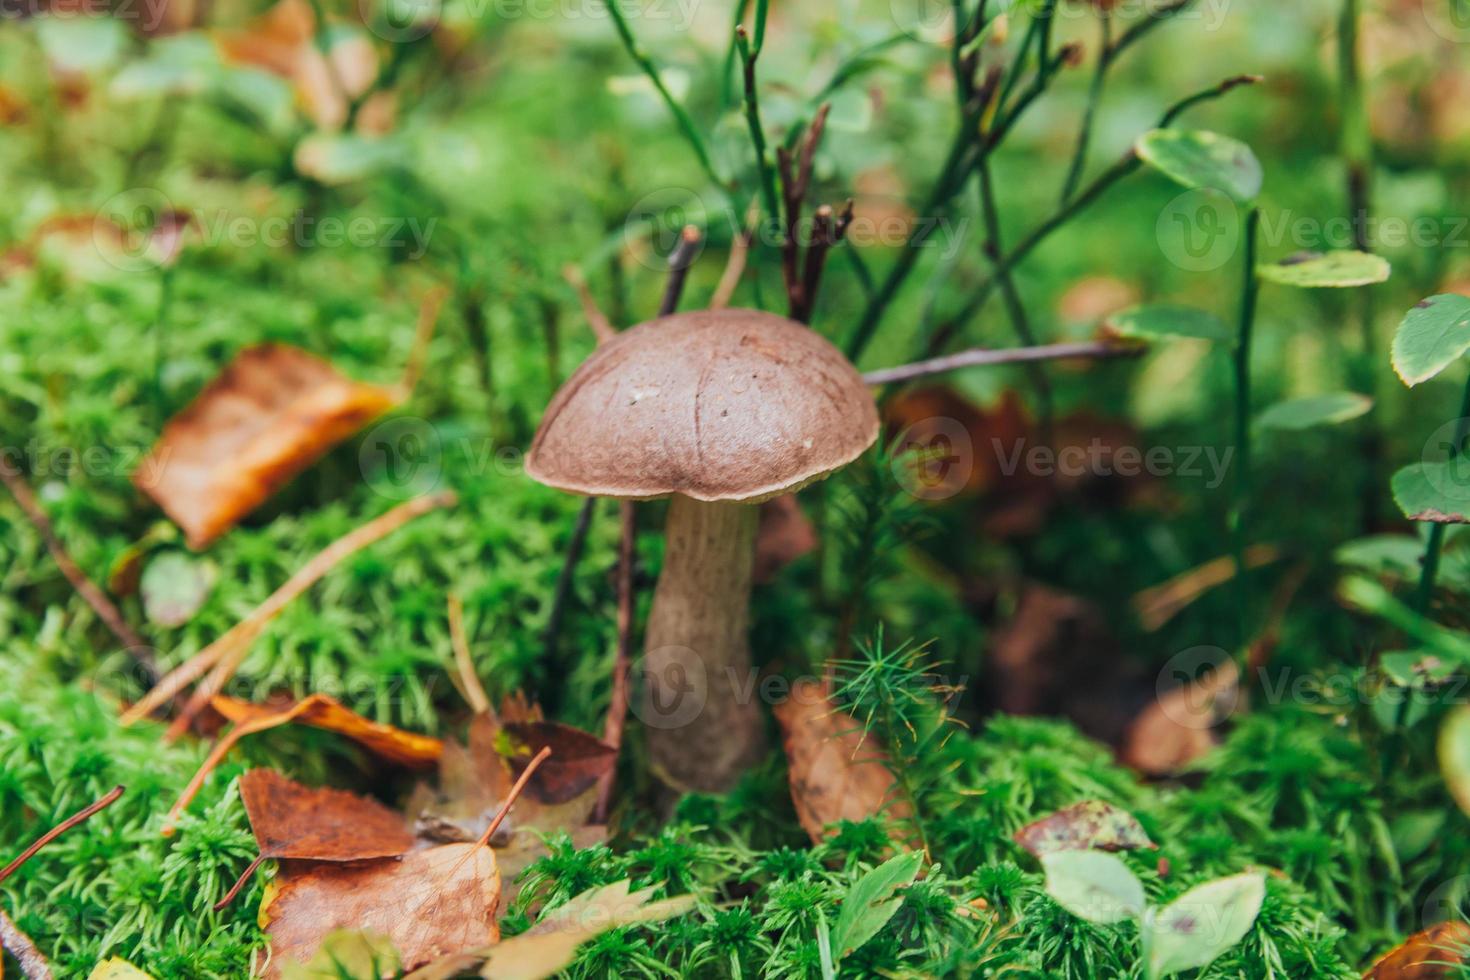 Edible small mushroom with brown cap Penny Bun leccinum in moss autumn forest background. Fungus in the natural environment. Big mushroom macro close up. Inspirational natural summer or fall landscape photo